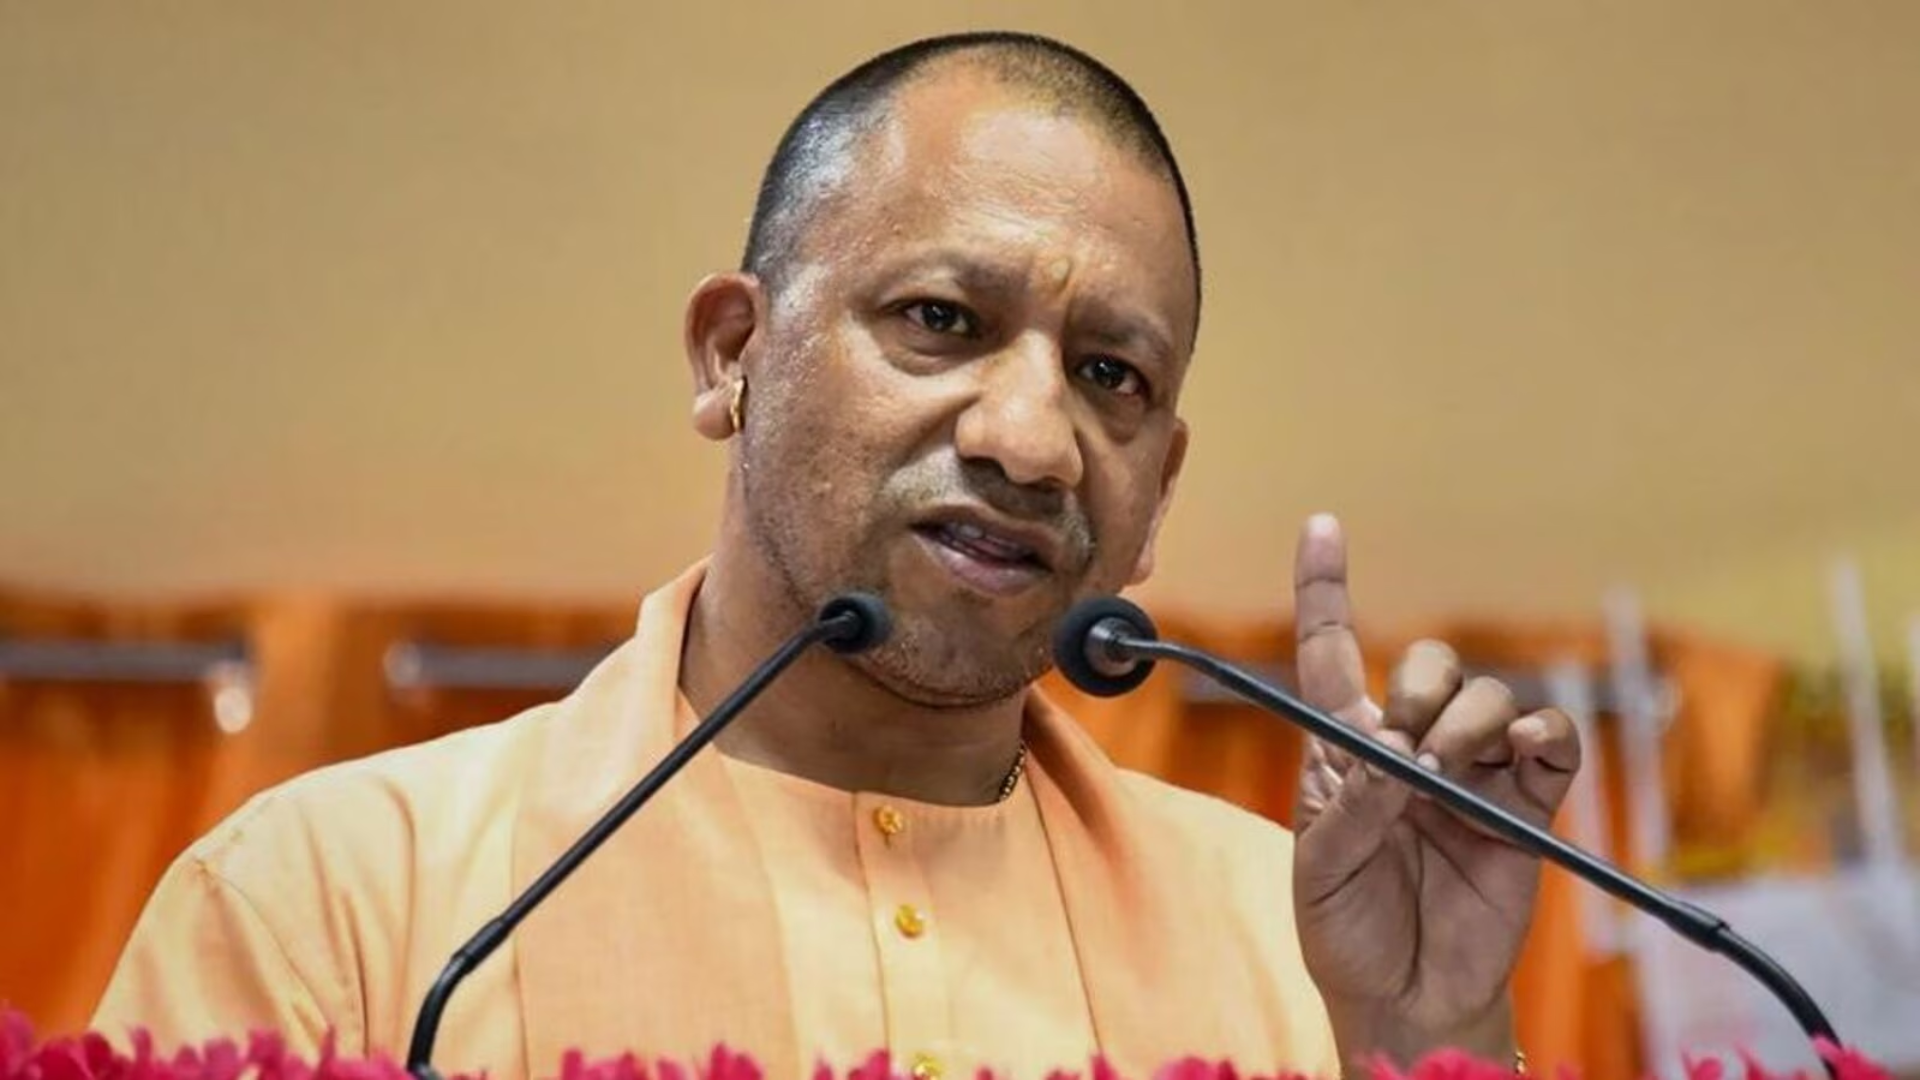 UP CM Yogi Adityanath Accuses Congress and SP of Reshuffling Reservation Allocations to Favor Muslims